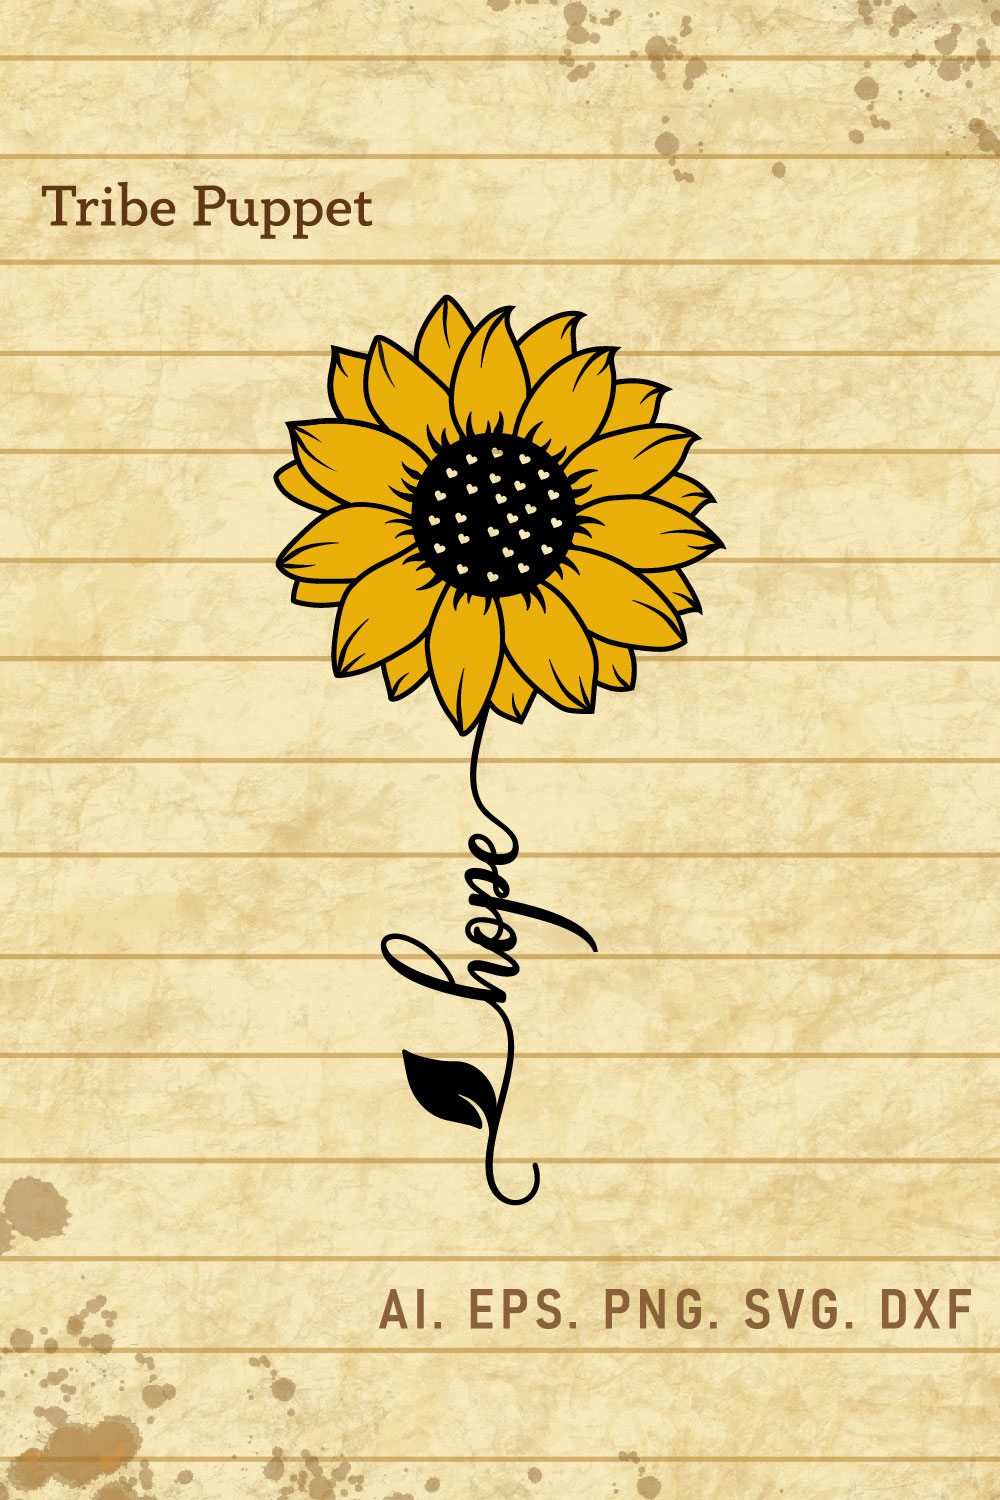 Sunflower 03 pinterest preview image.